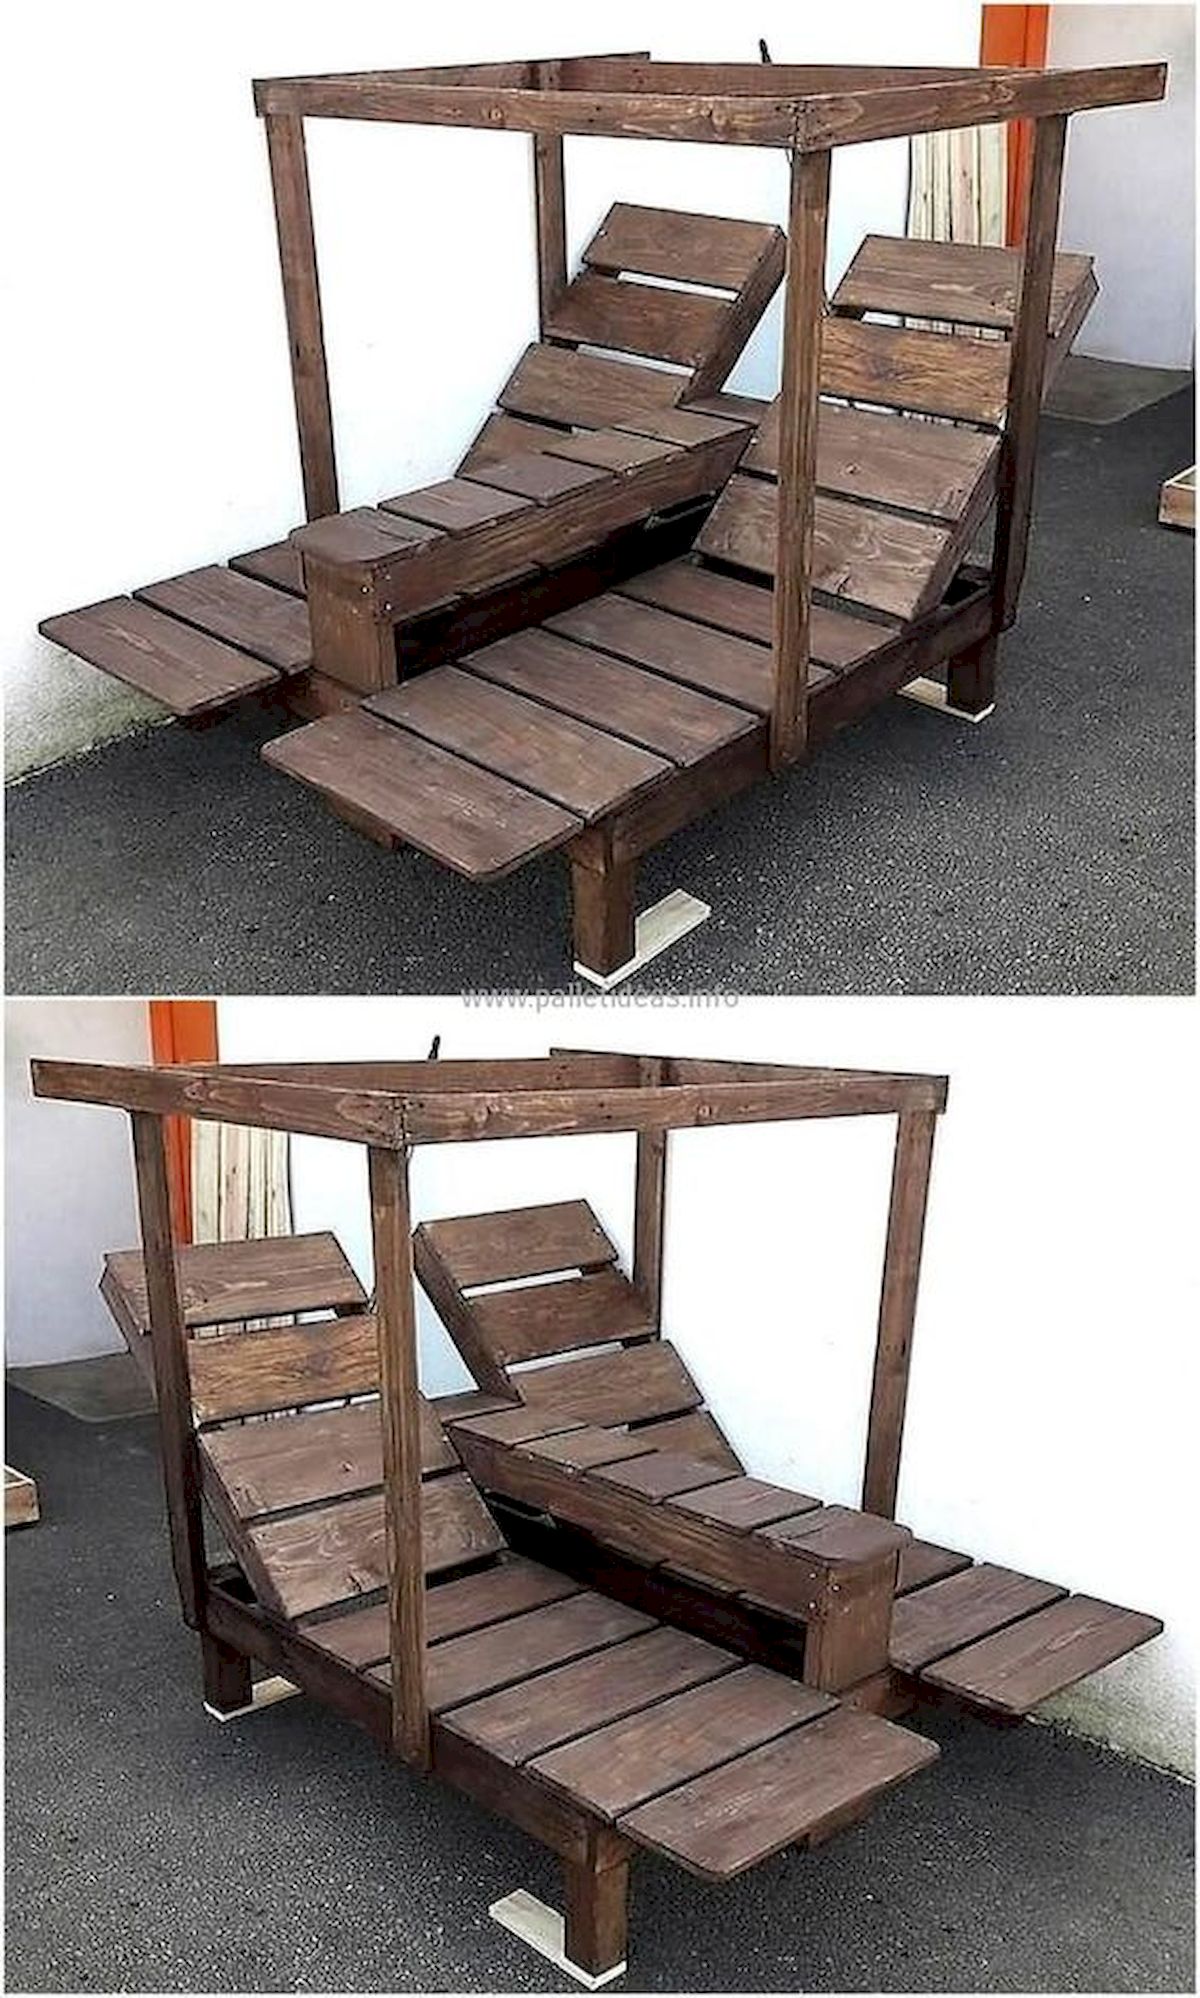 50 Amazing DIY Projects Outdoor Furniture Design Ideas (32)